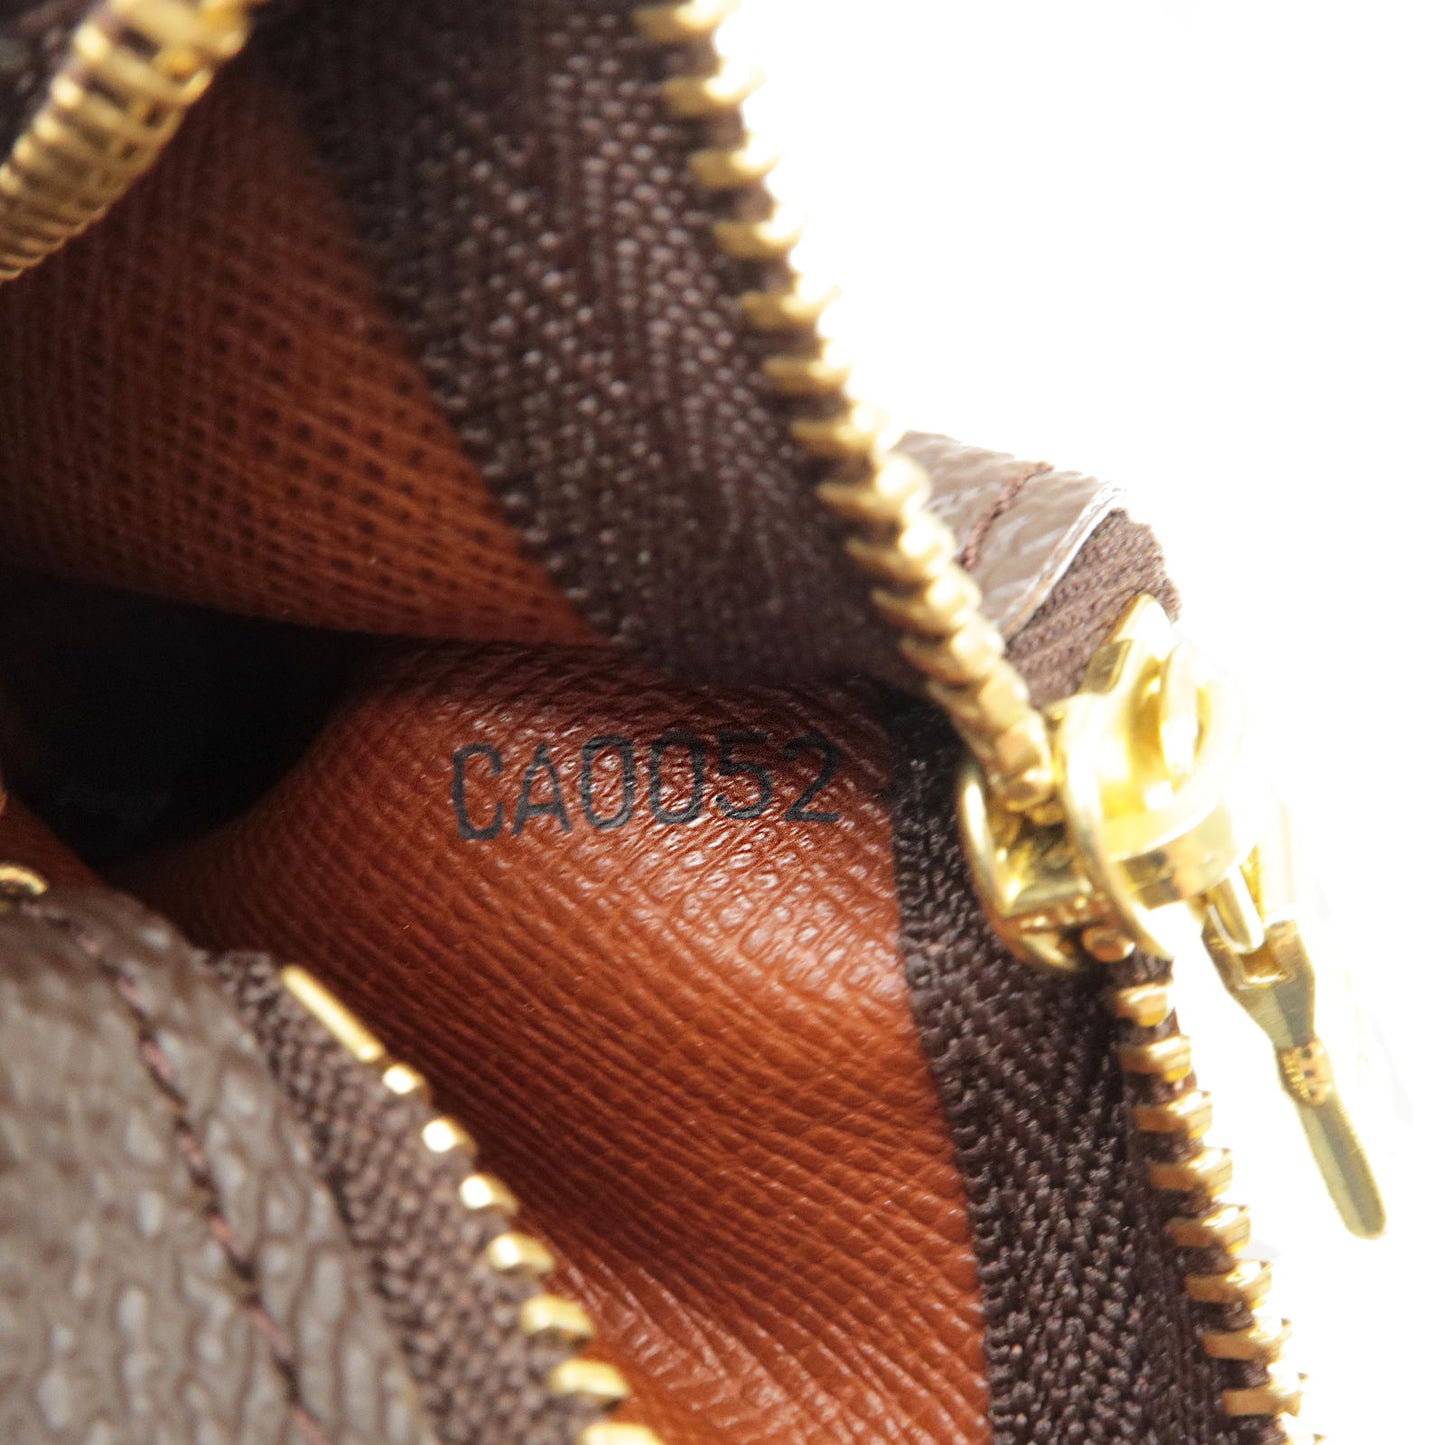 Buy Louis Vuitton monogram LOUIS VUITTON Pochette Cle Monogram M62650 Coin  Case Brown / 082609 [Used] from Japan - Buy authentic Plus exclusive items  from Japan